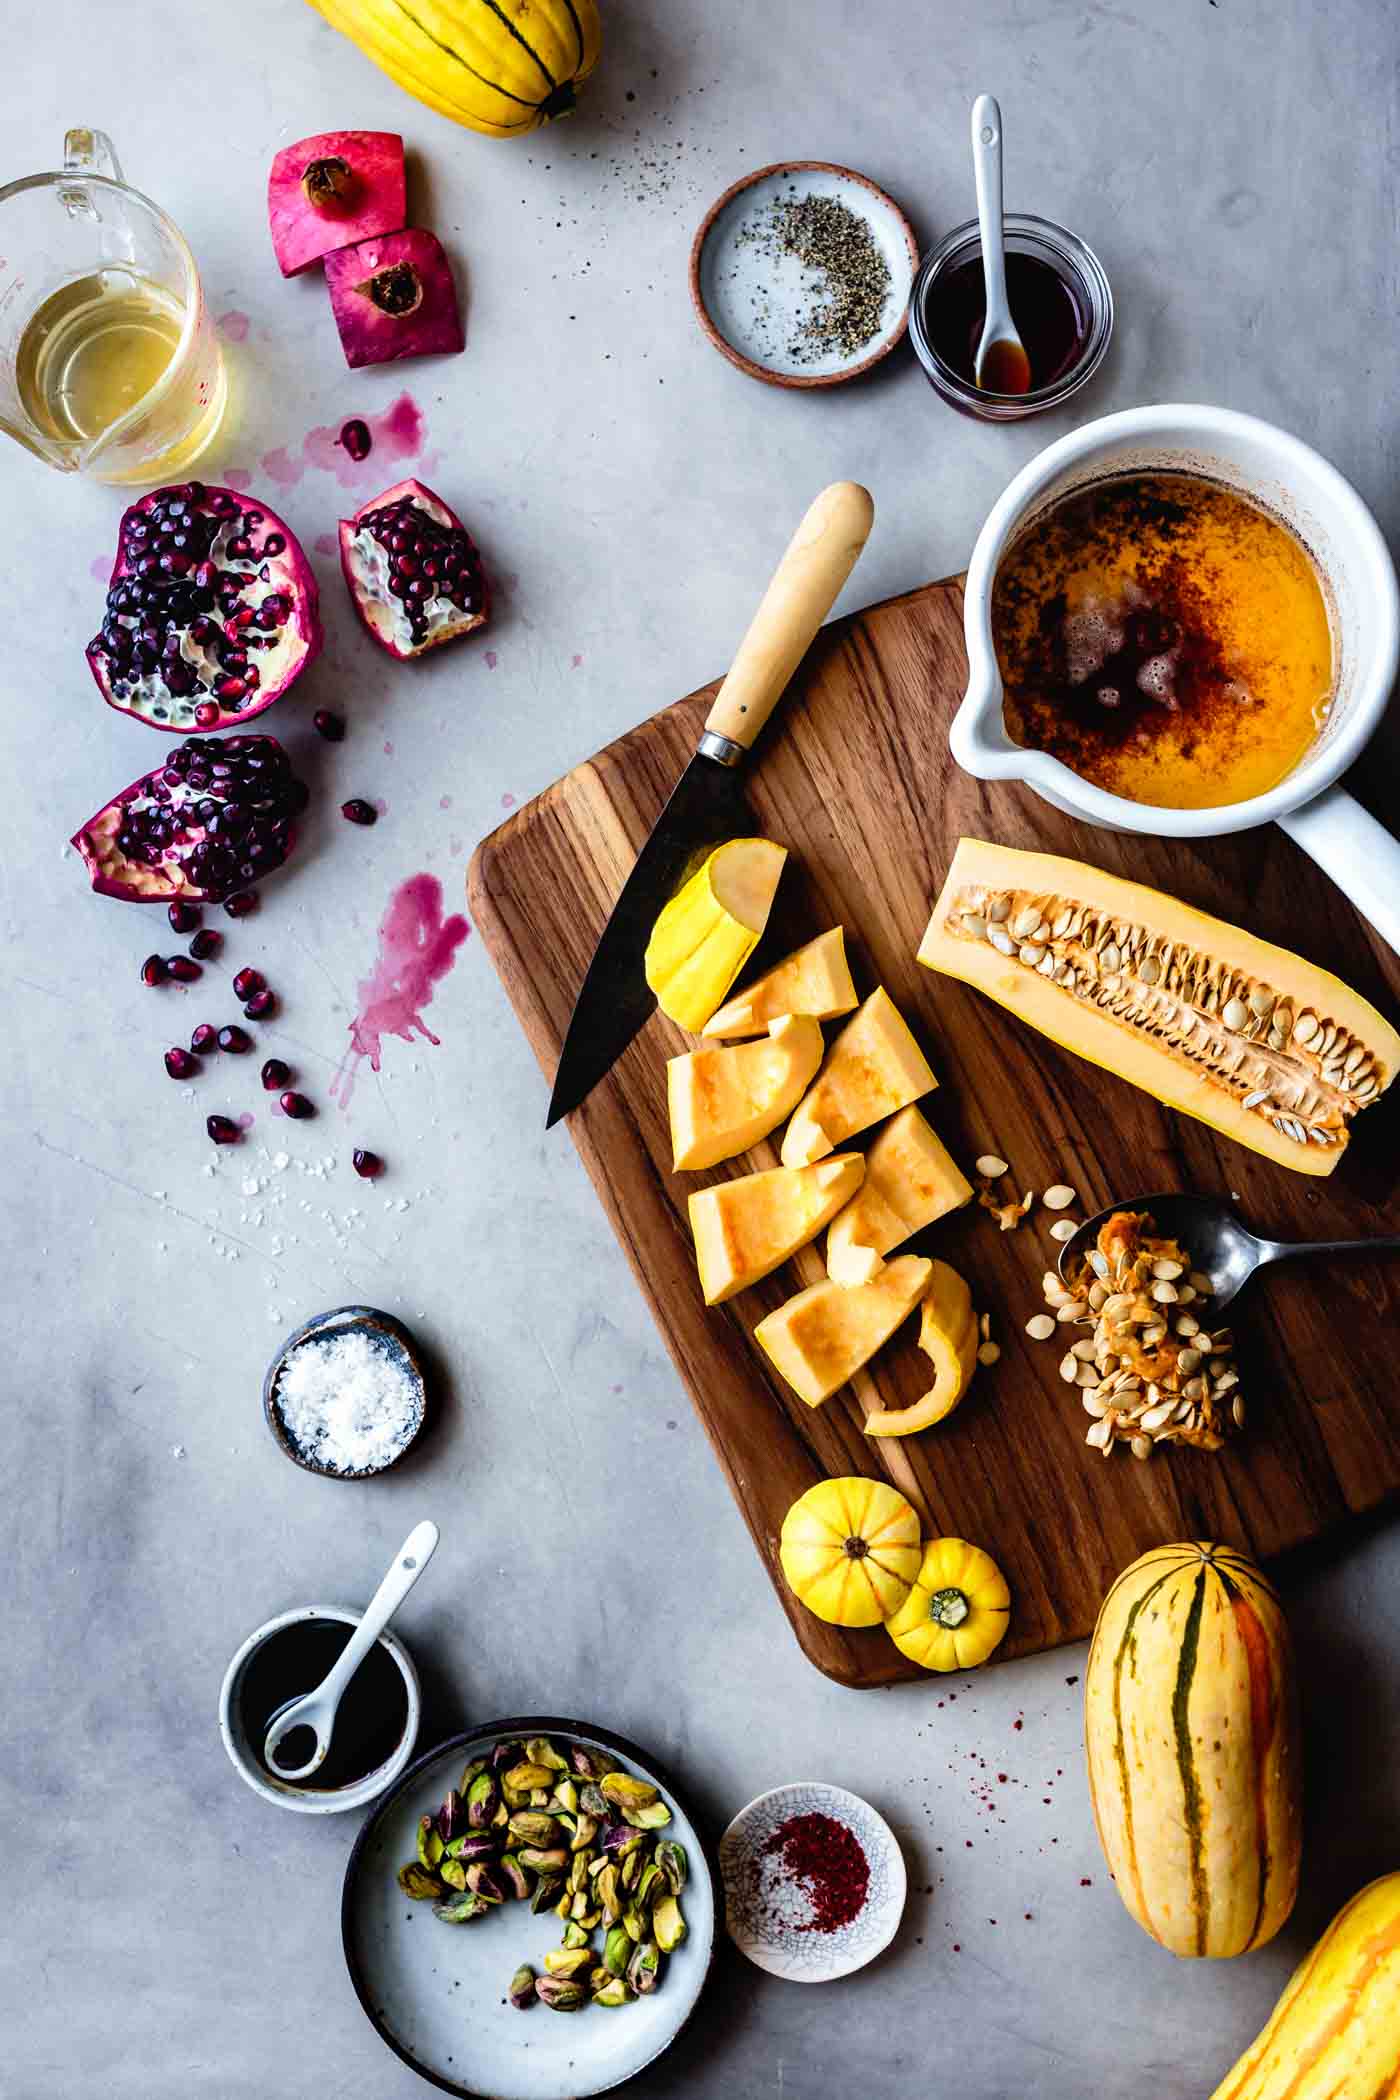 Ingredients for roasted delicata squash recipe with brown butter and pomegranate molasses